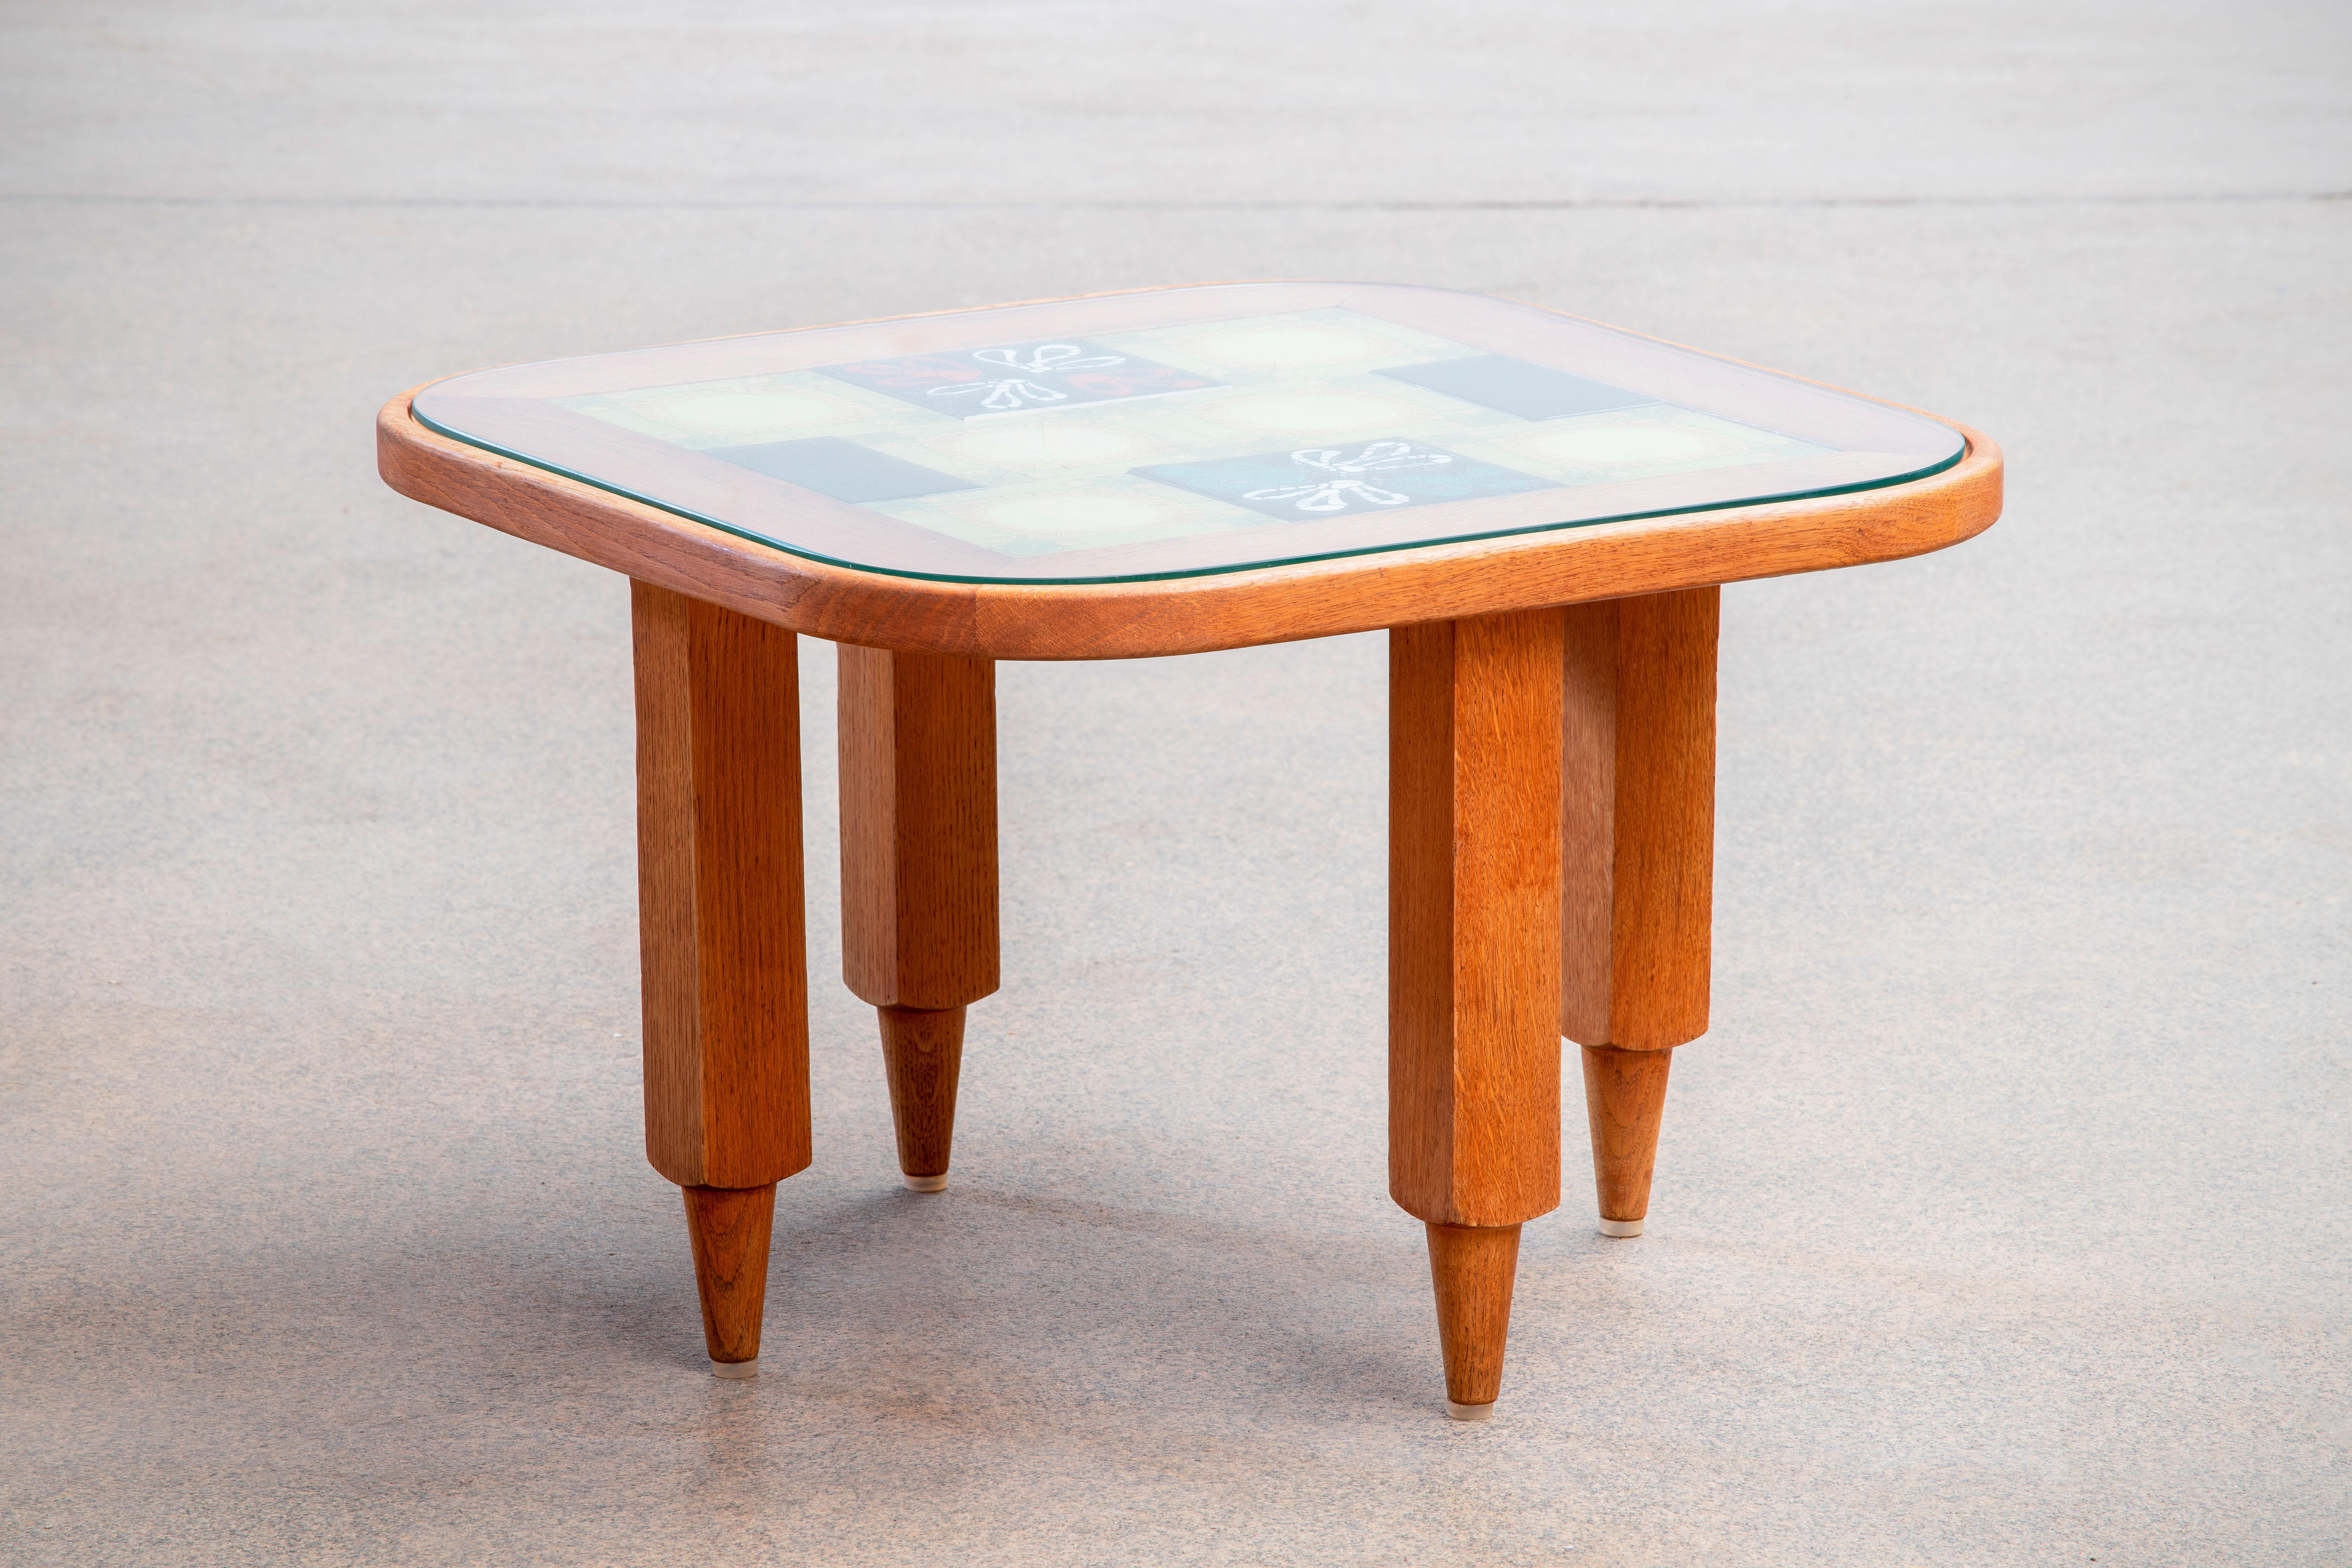 20th Century Coffee Table, in Oak and Ceramic by Guillerme et Chambron, France, 1960 For Sale